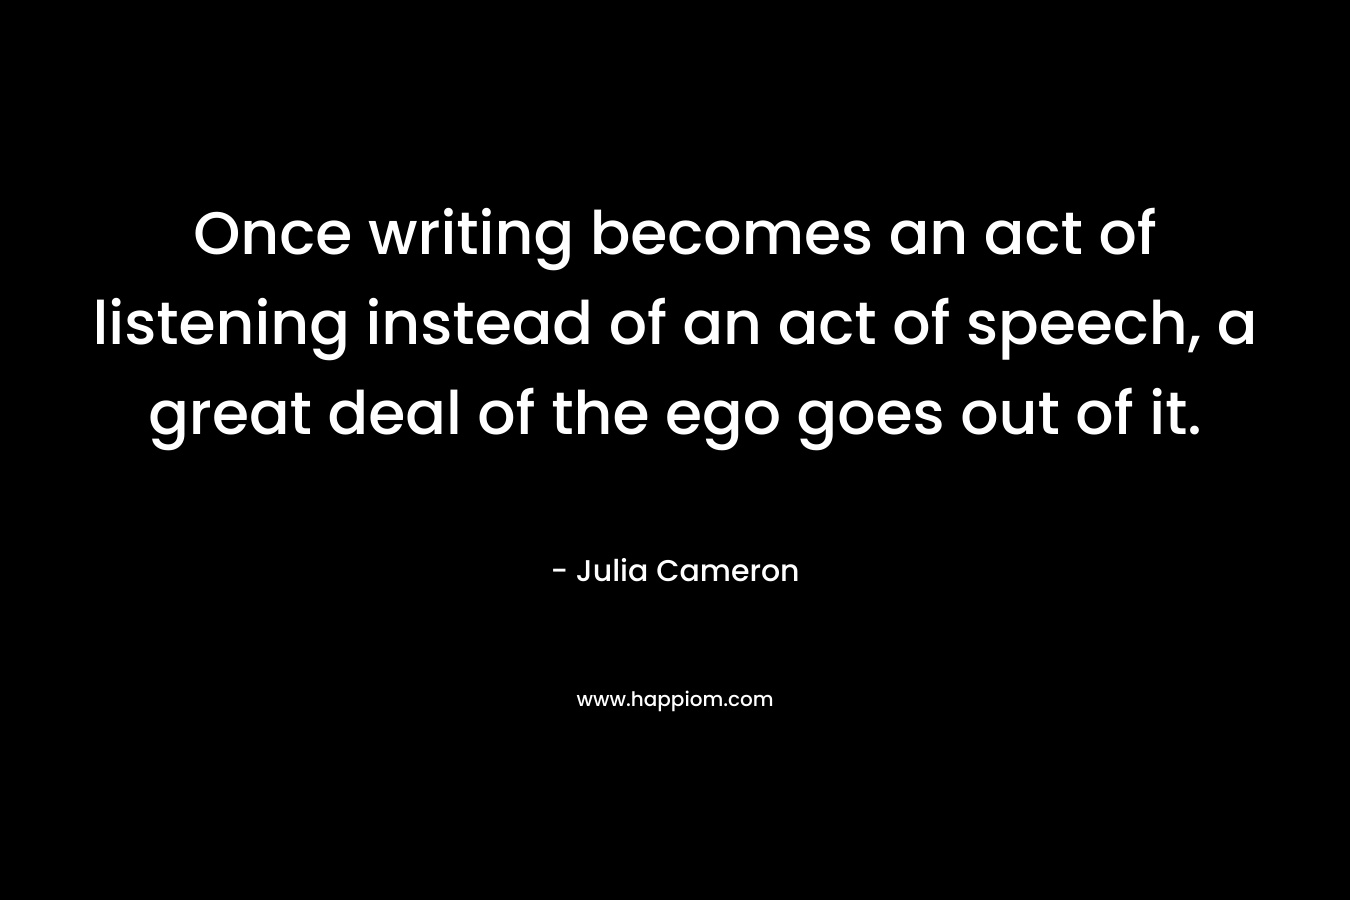 Once writing becomes an act of listening instead of an act of speech, a great deal of the ego goes out of it.